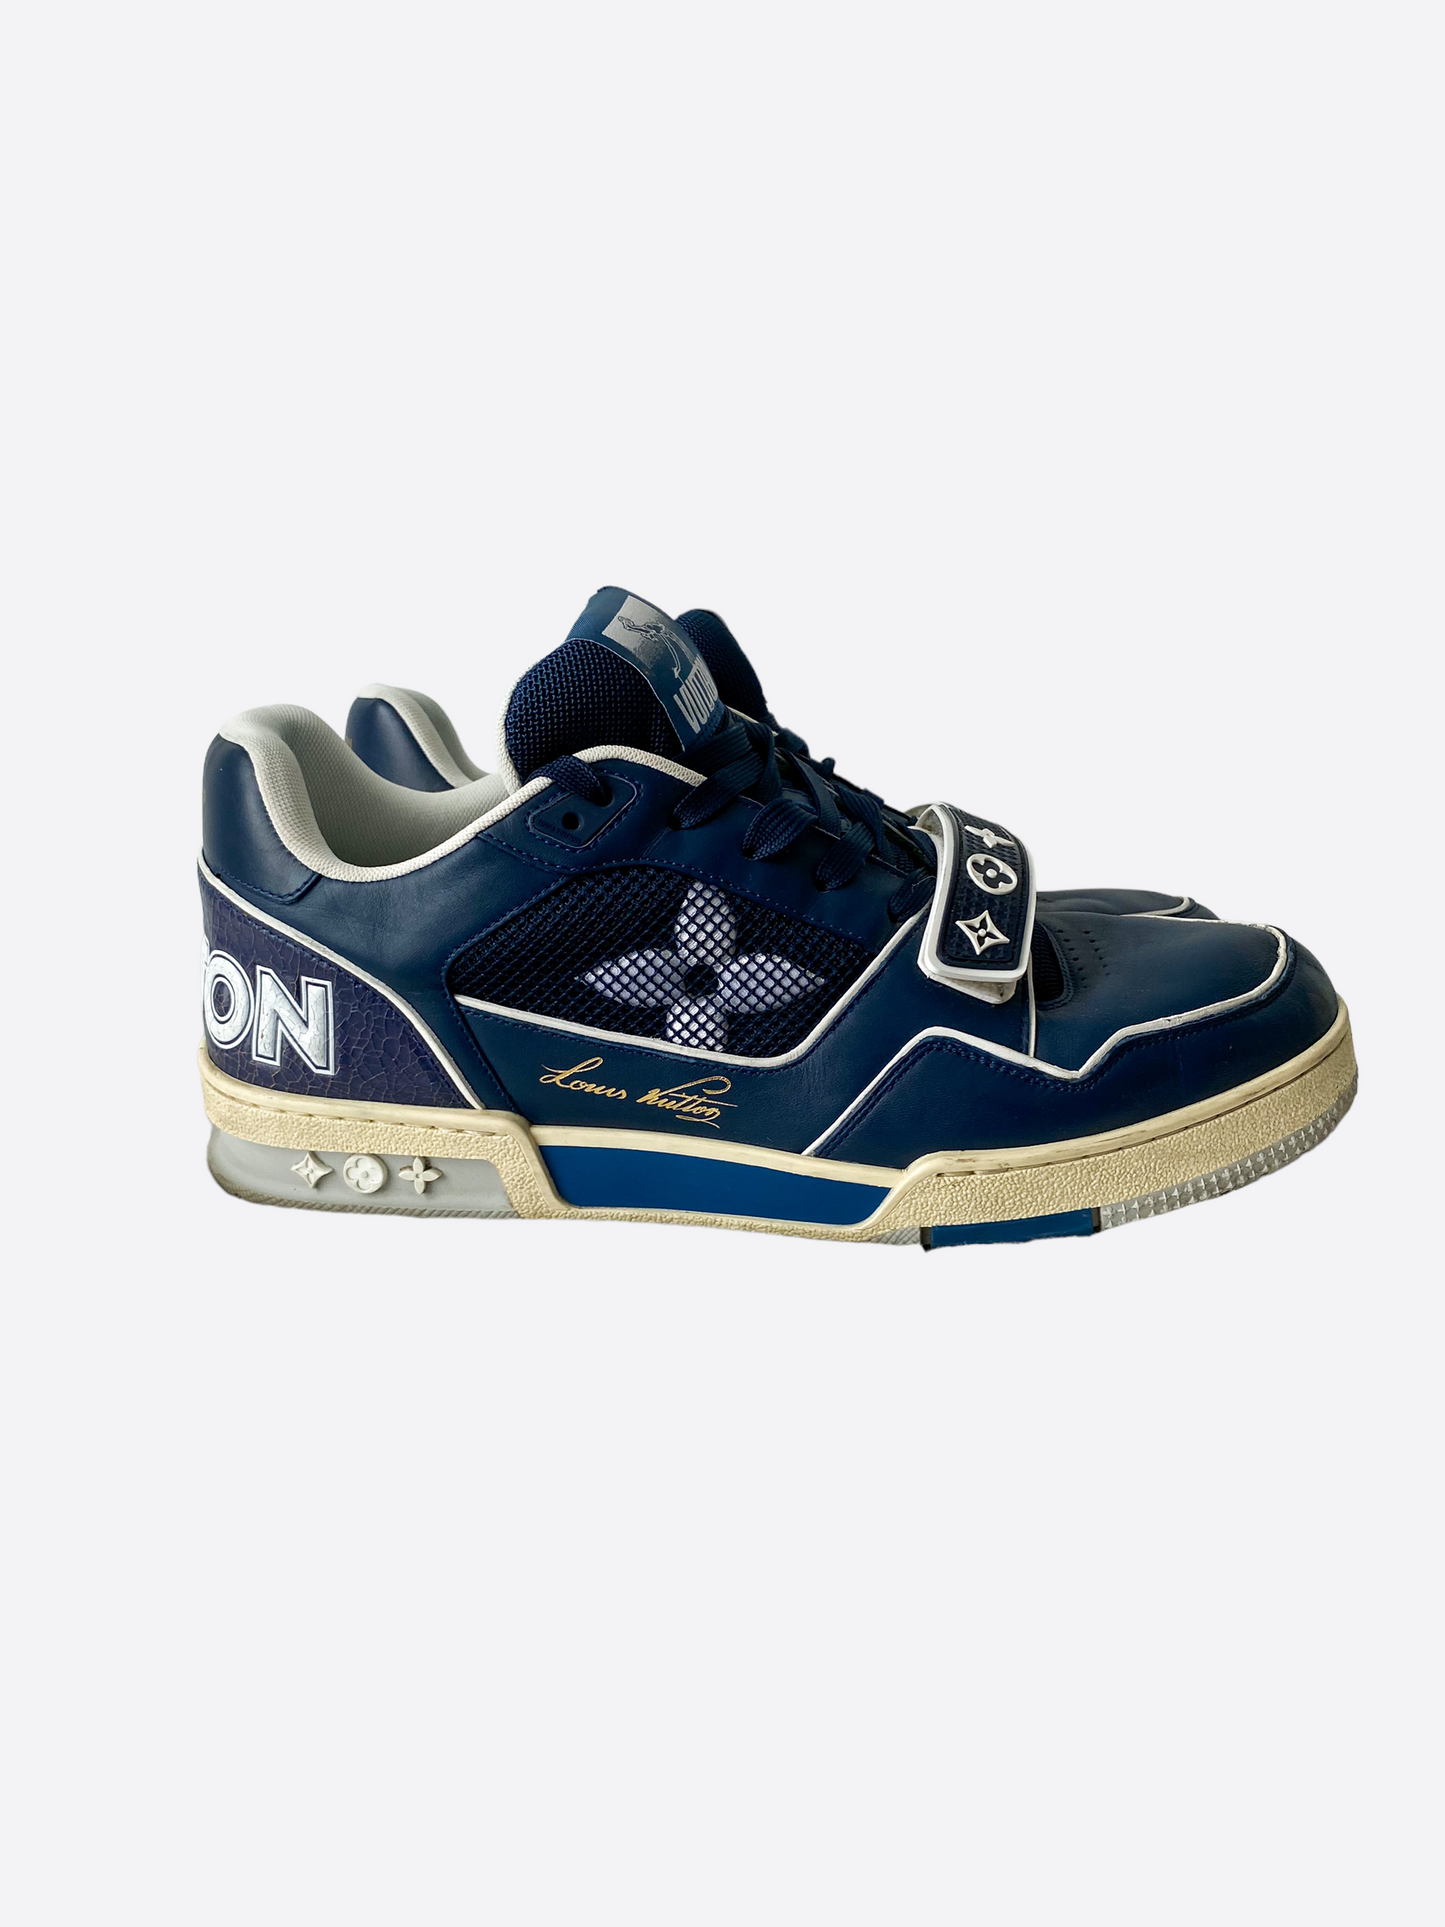 LOUIS VUITTON LV TRAINER SNEAKERS IN WHITE AND NAVY BLUE